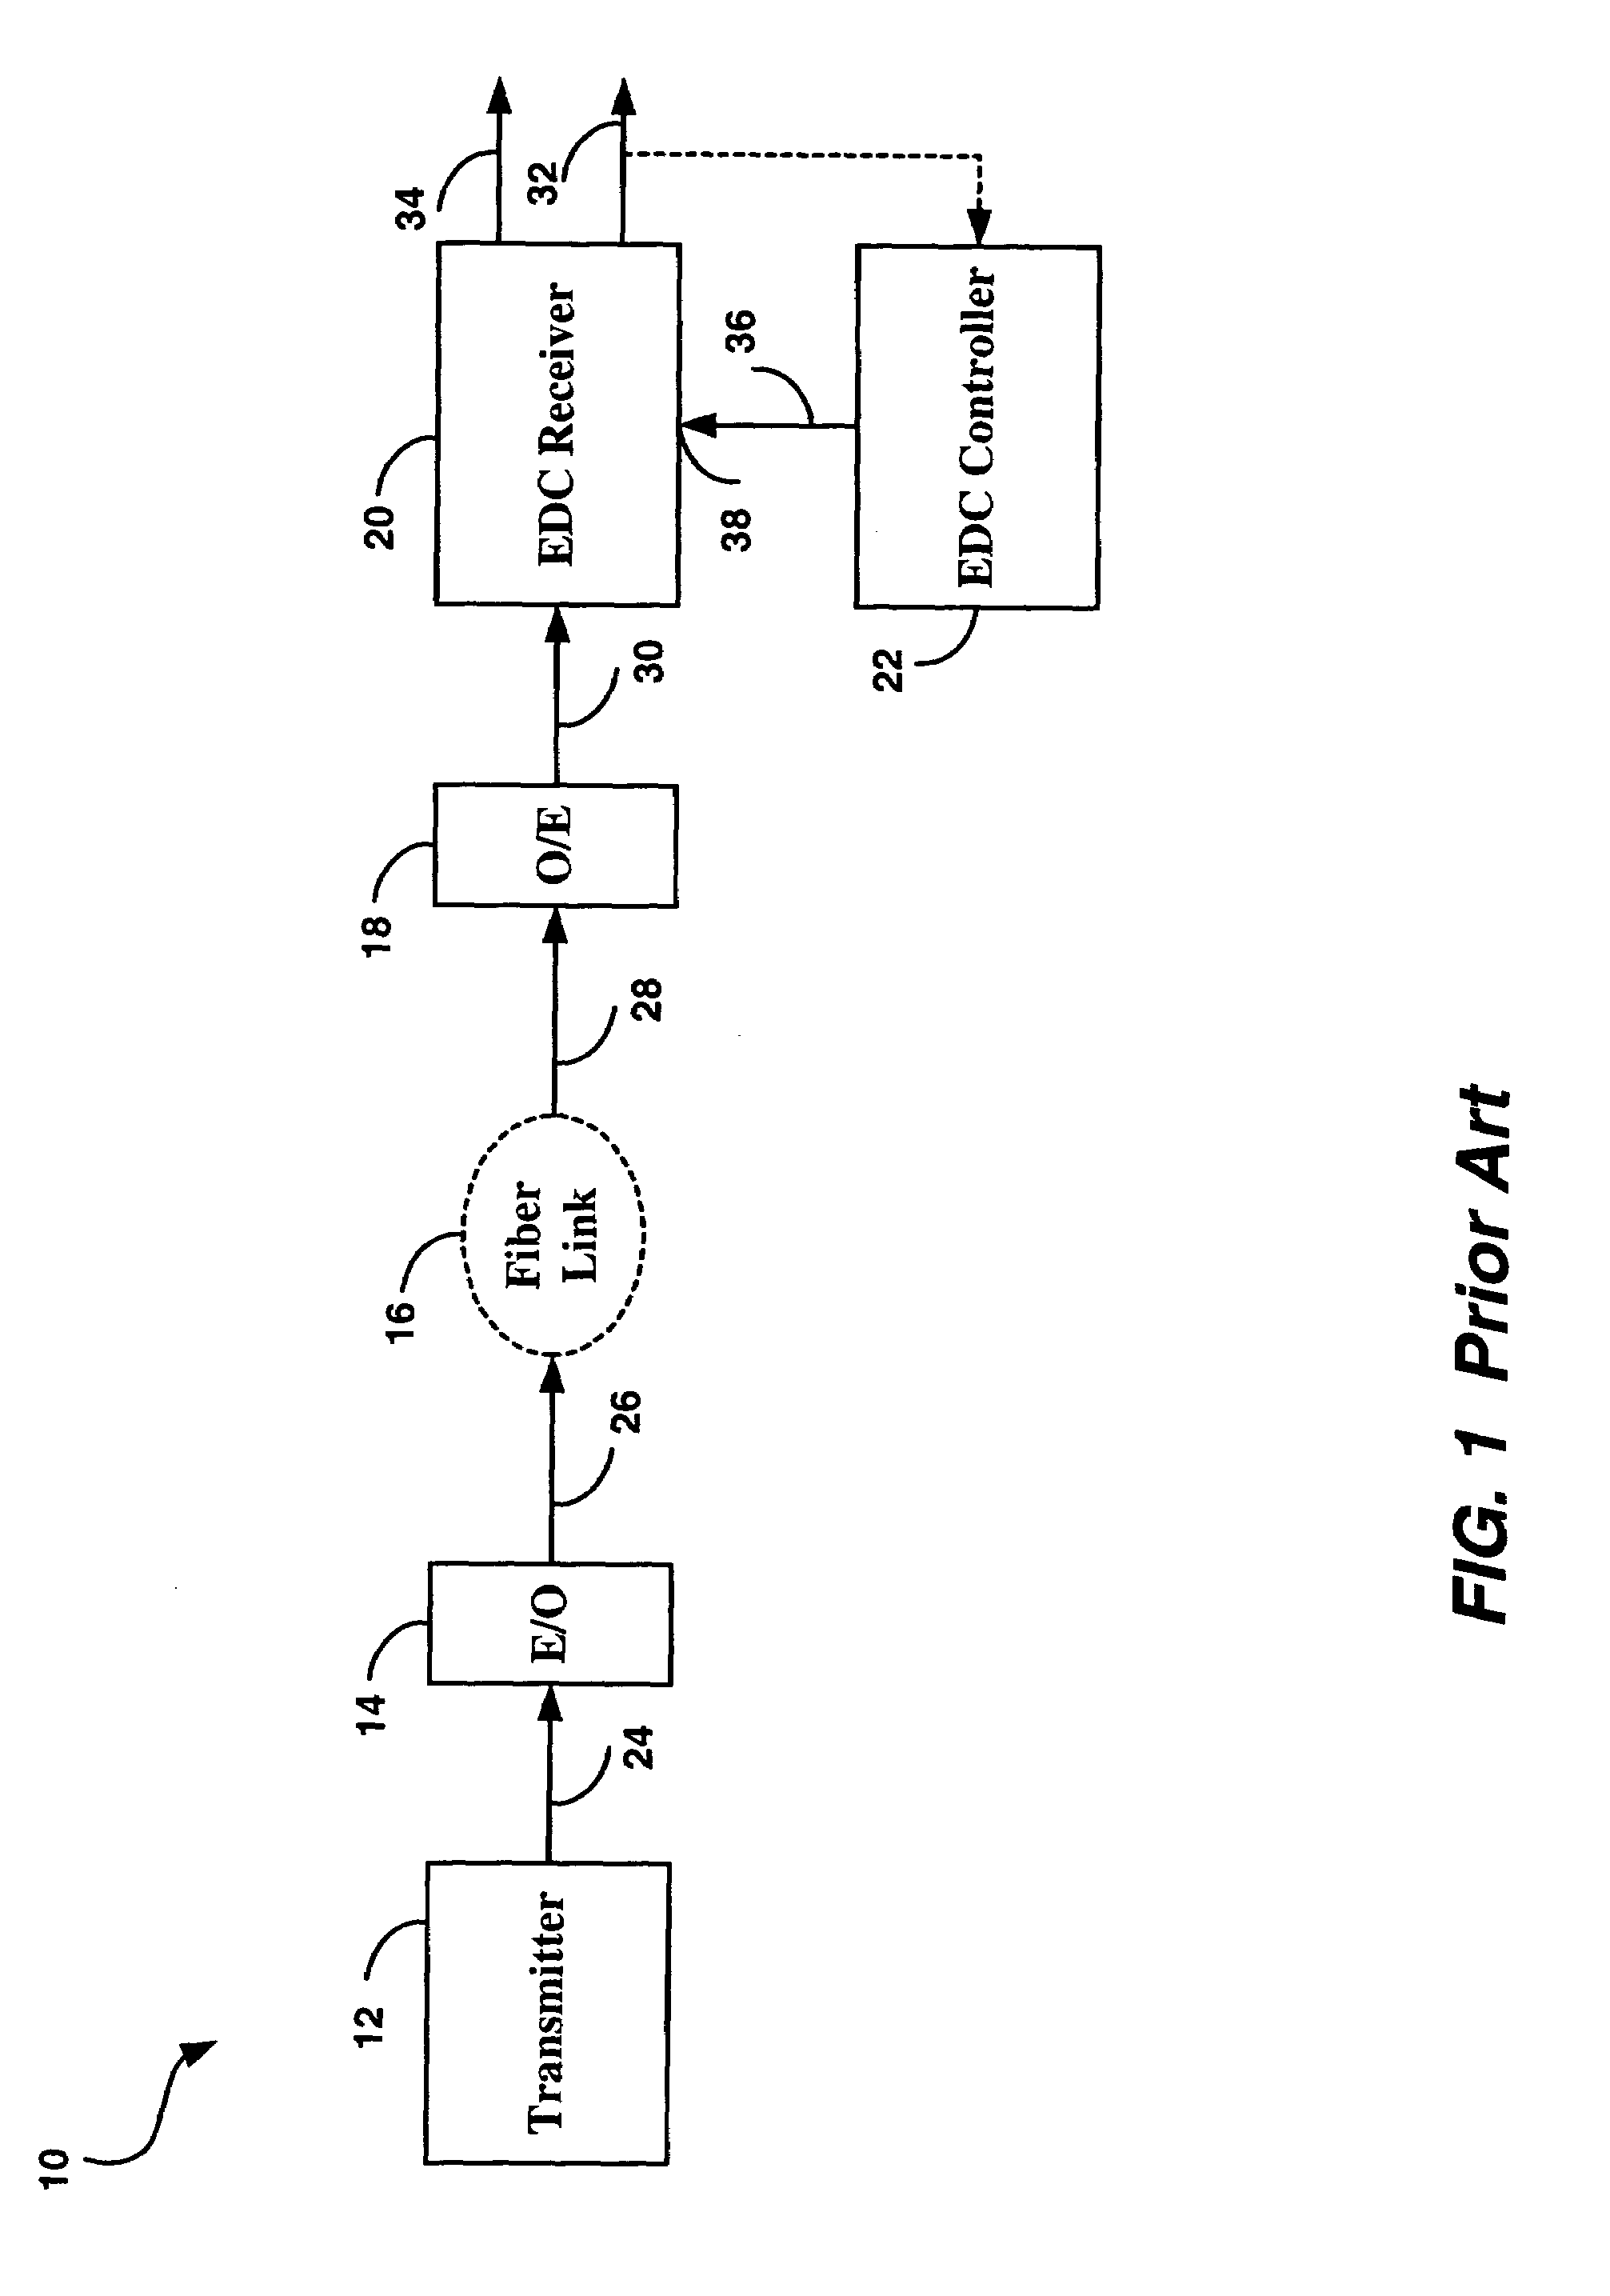 Differential receiver circuit with electronic dispersion compensation